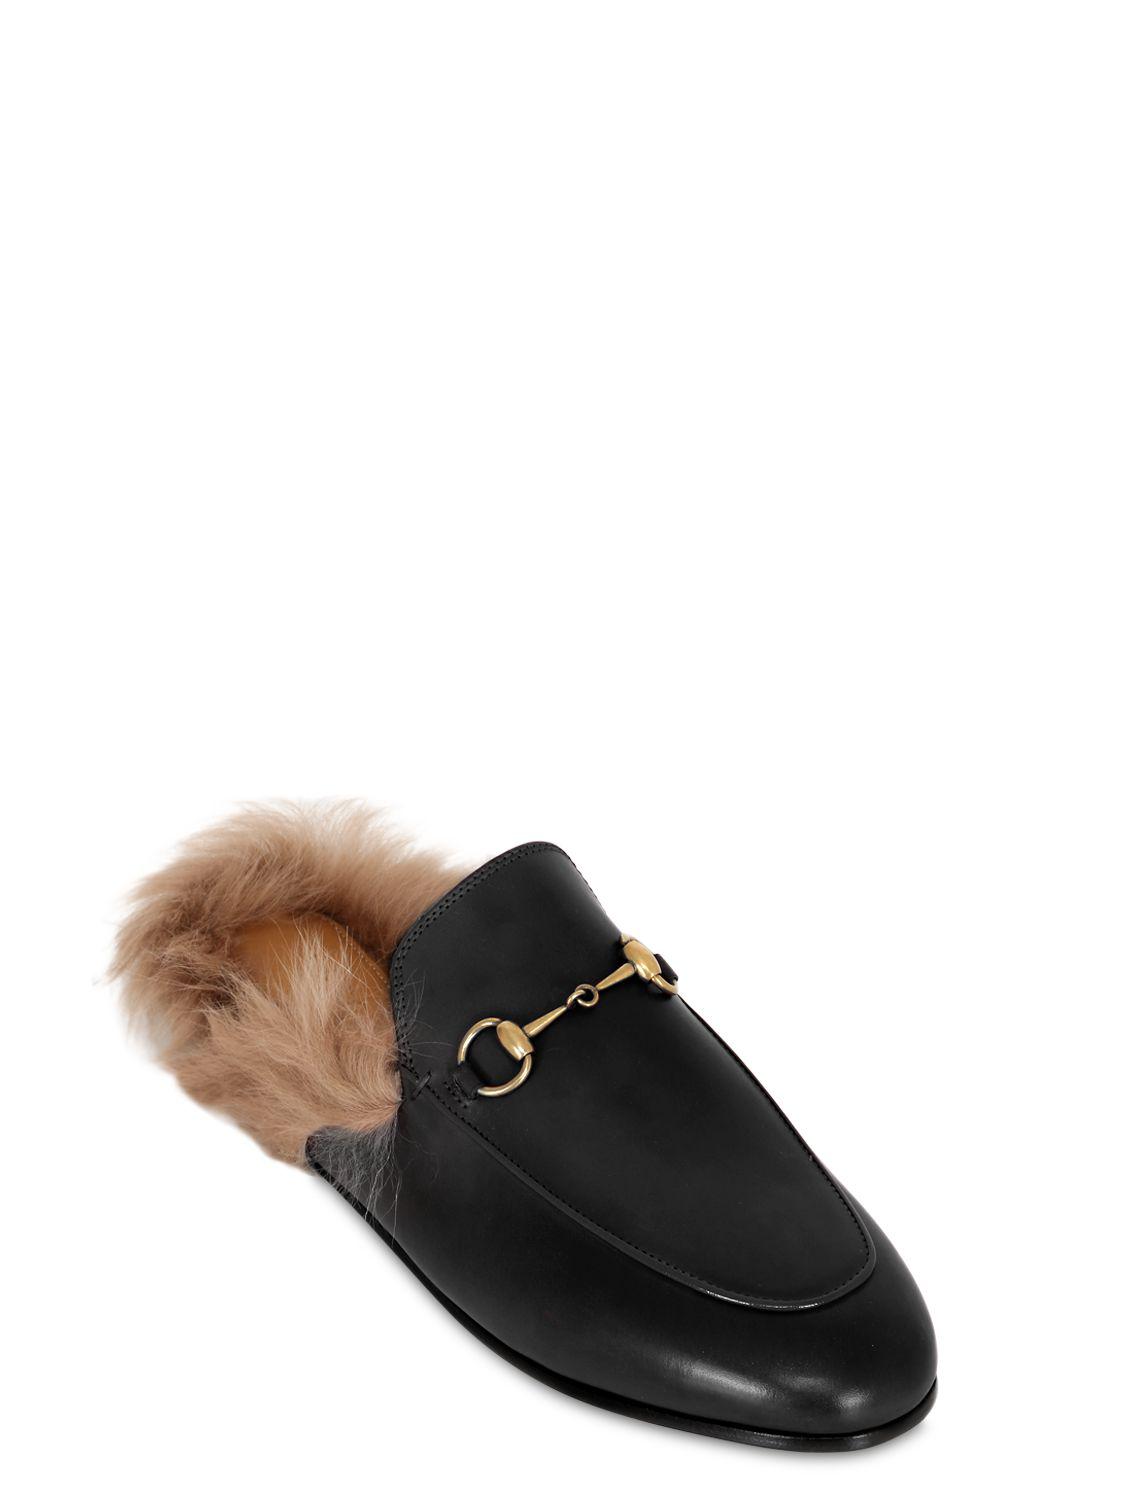 Gucci Princetown Fur-lined Leather Mule in Black | Lyst Canada